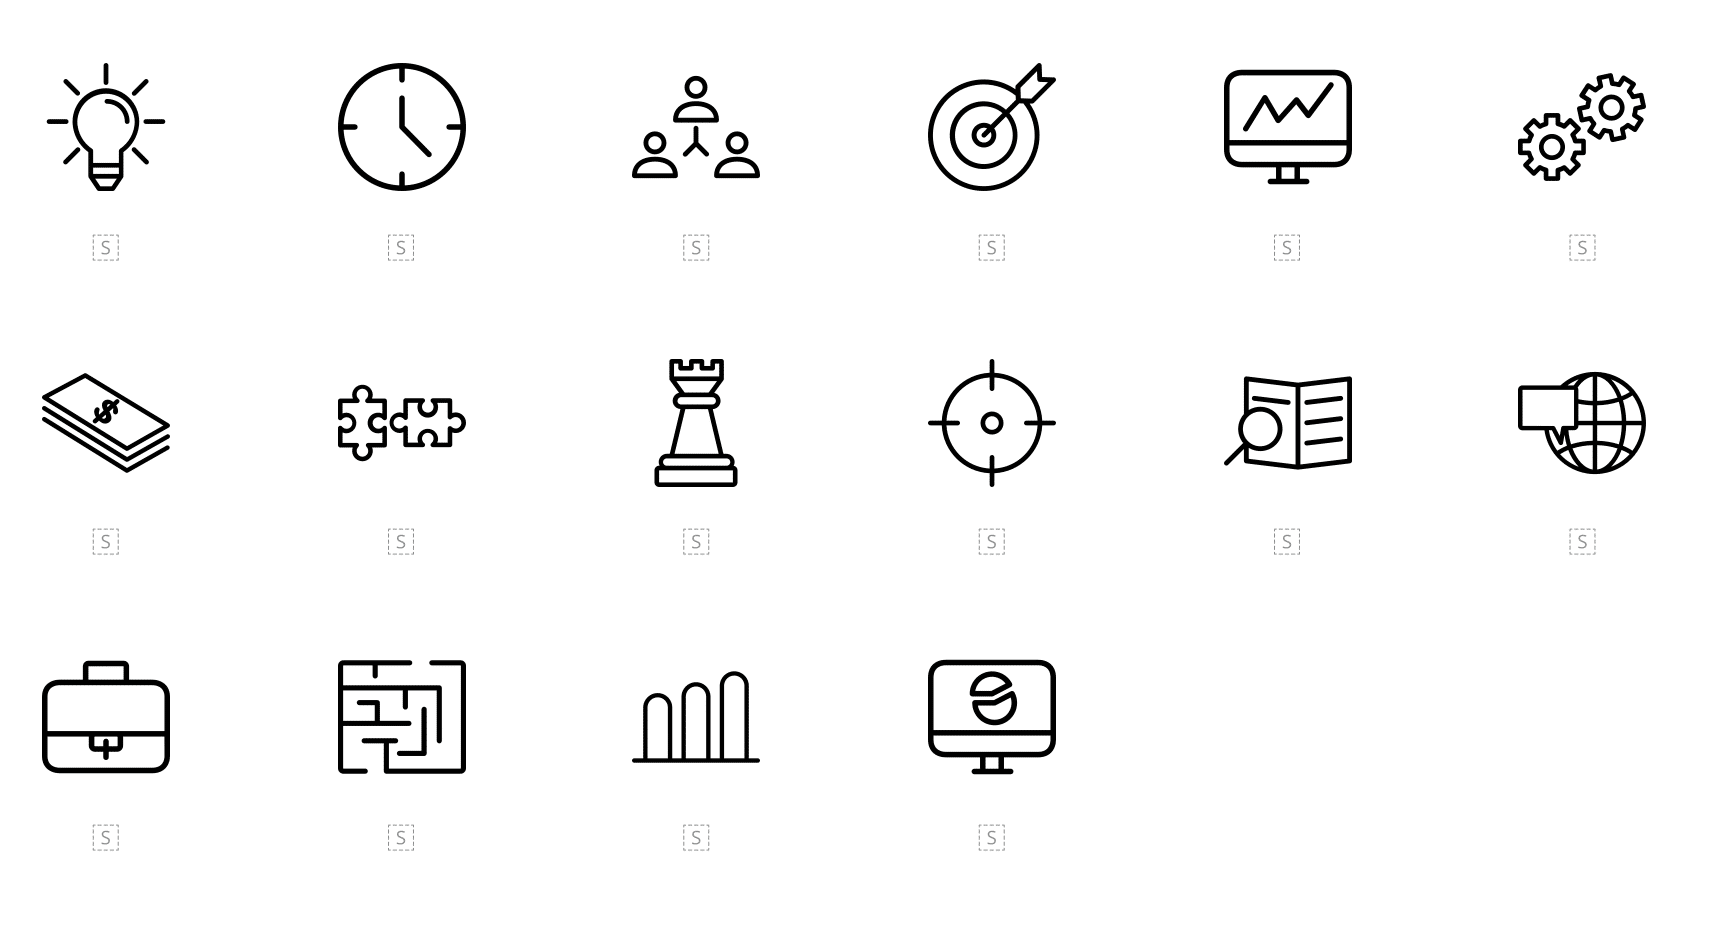 A screenshot of free icons from Flaticon